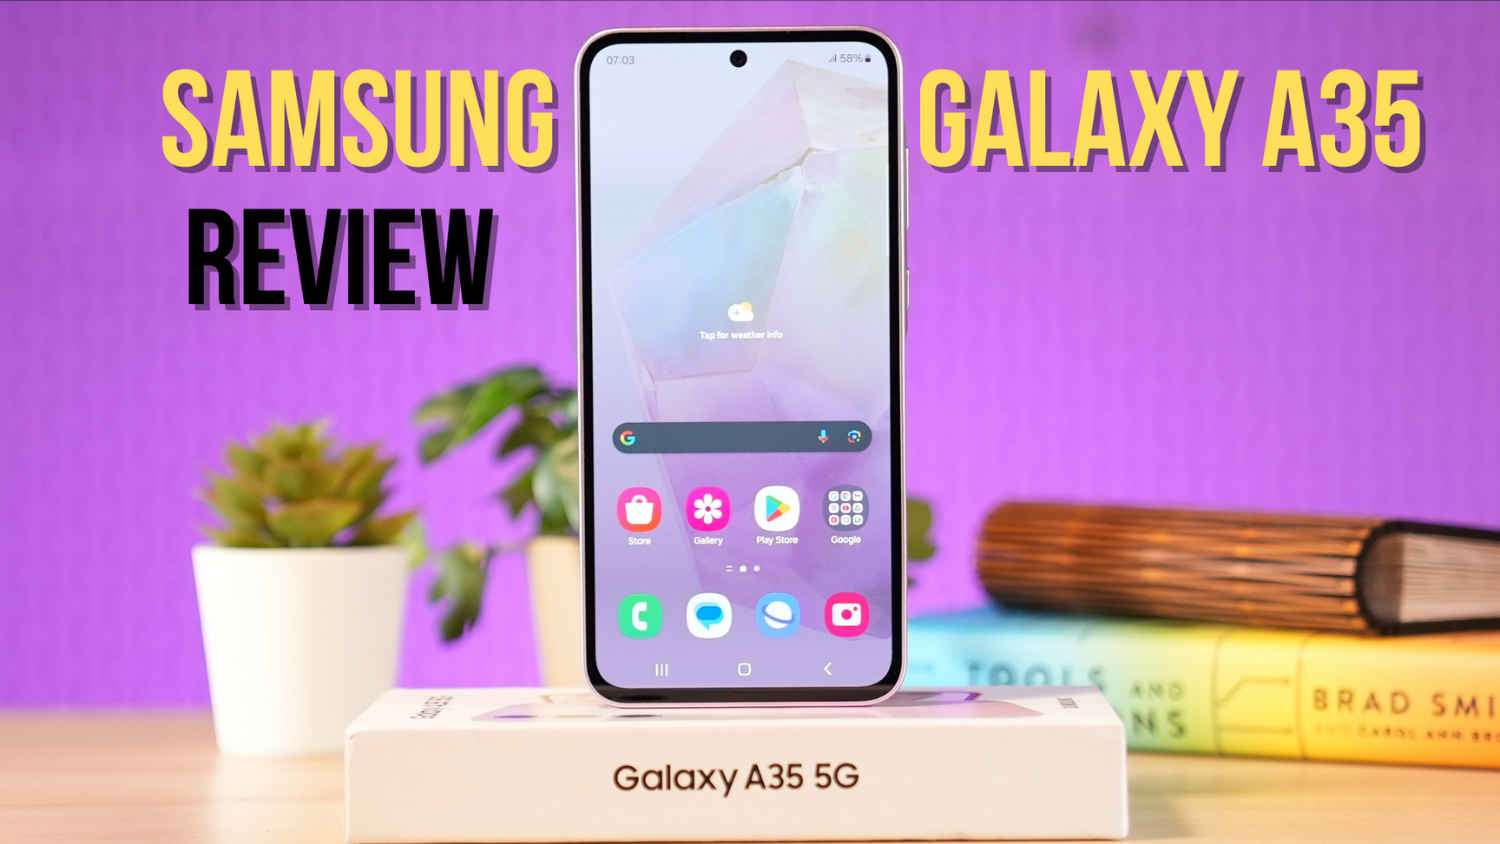 Samsung Galaxy A35 Review: Reliable and polished but not for gamers